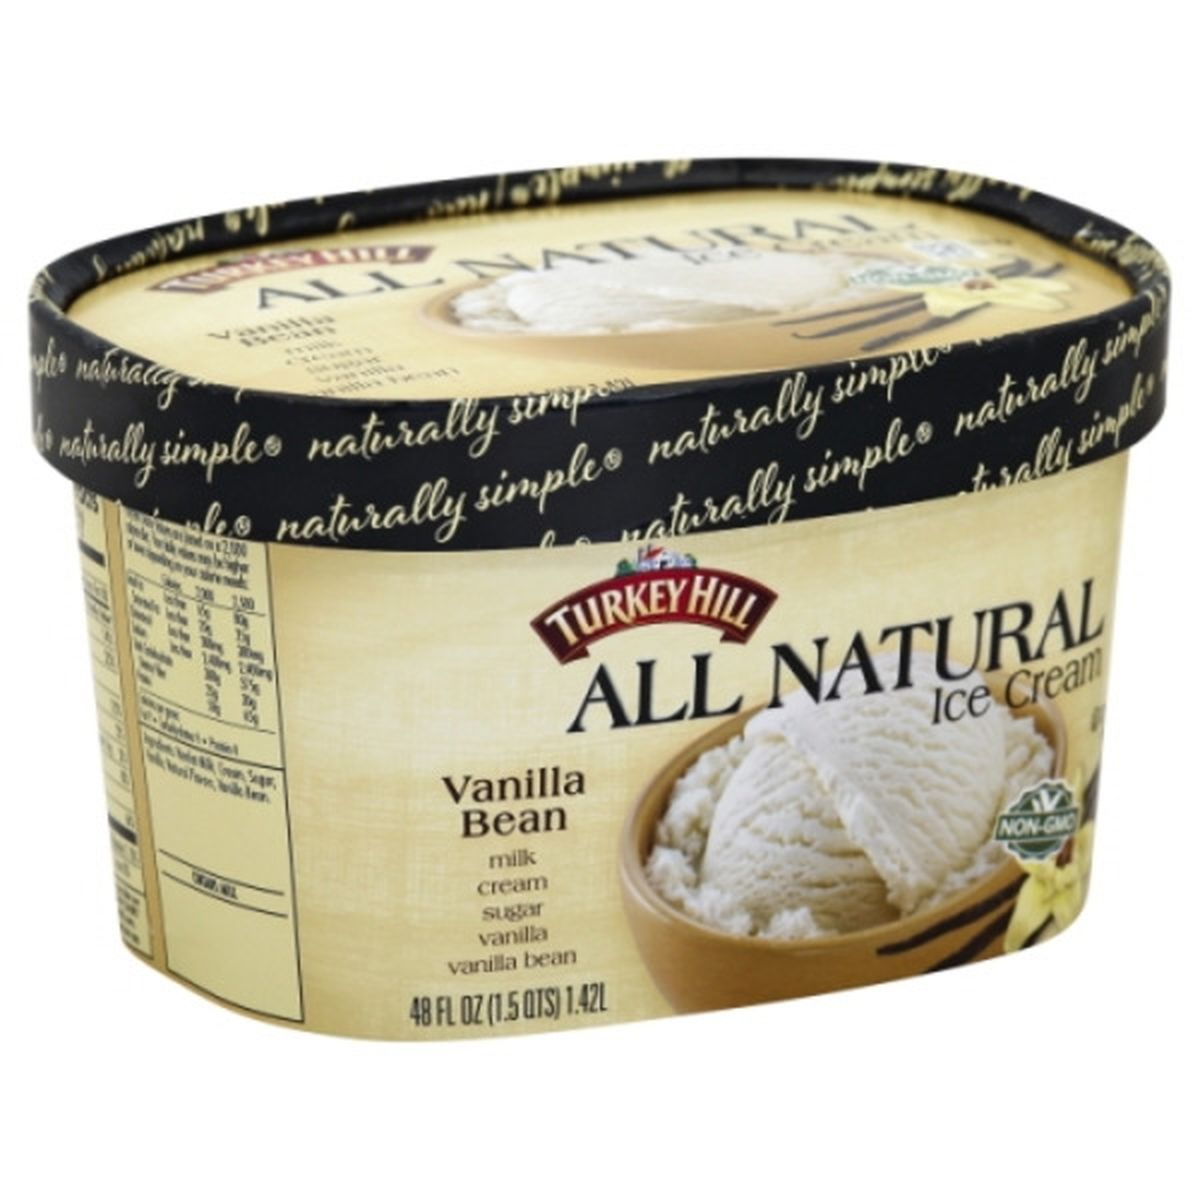 Calories in Turkey Hill Naturally Simple Ice Cream, All Natural, Vanilla Bean